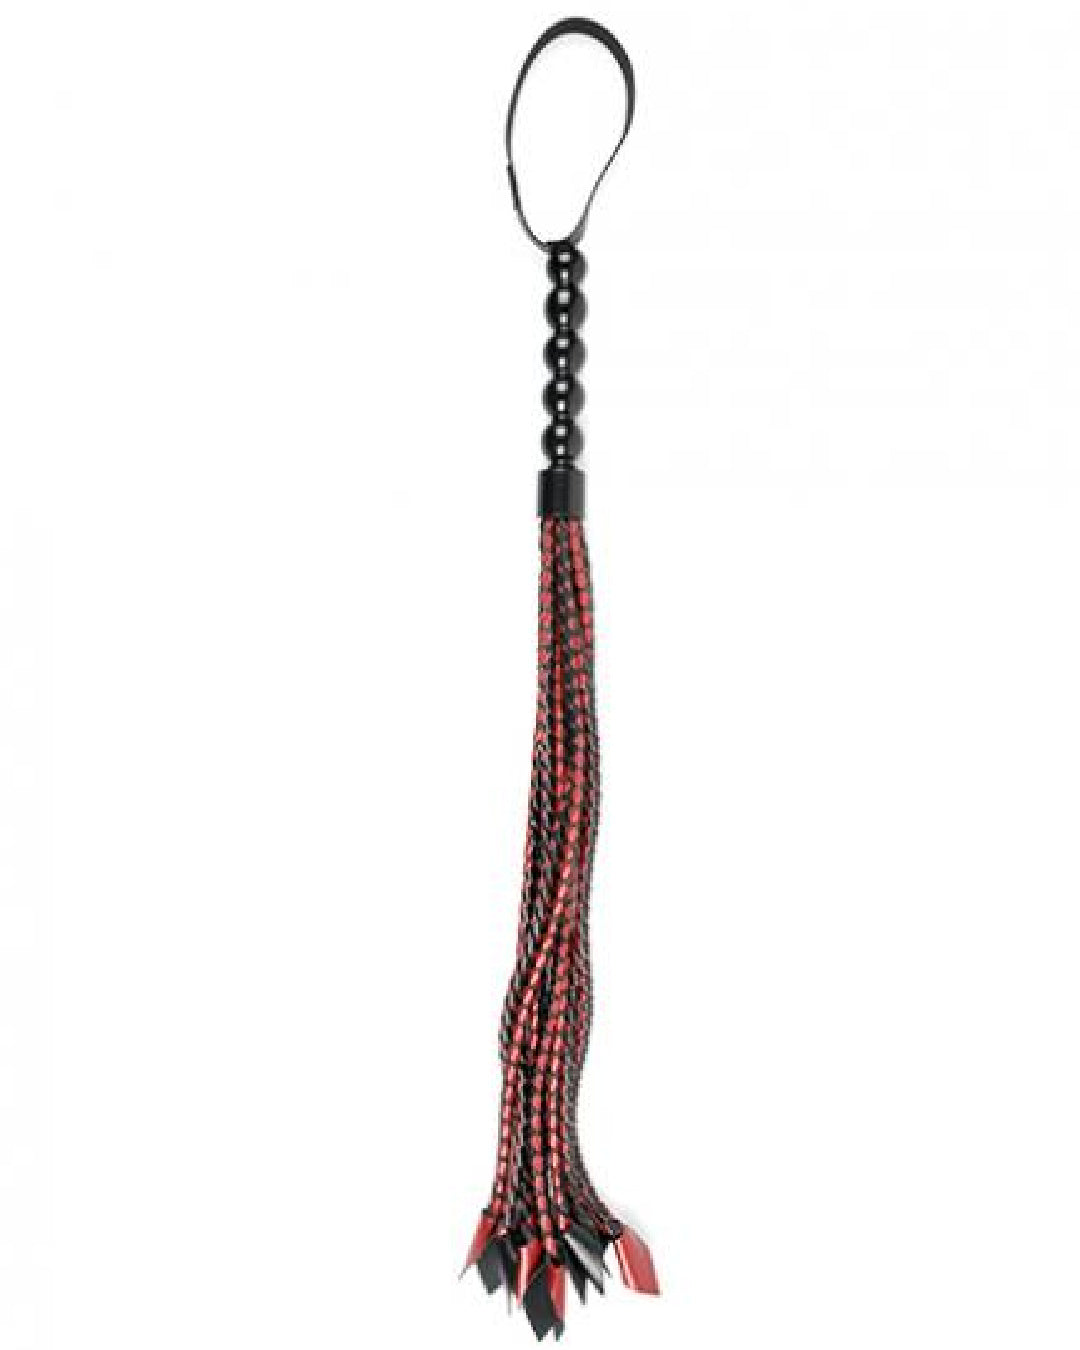 Saffron Braided Flogger by Sportsheets  black and red flogger upright on white background 